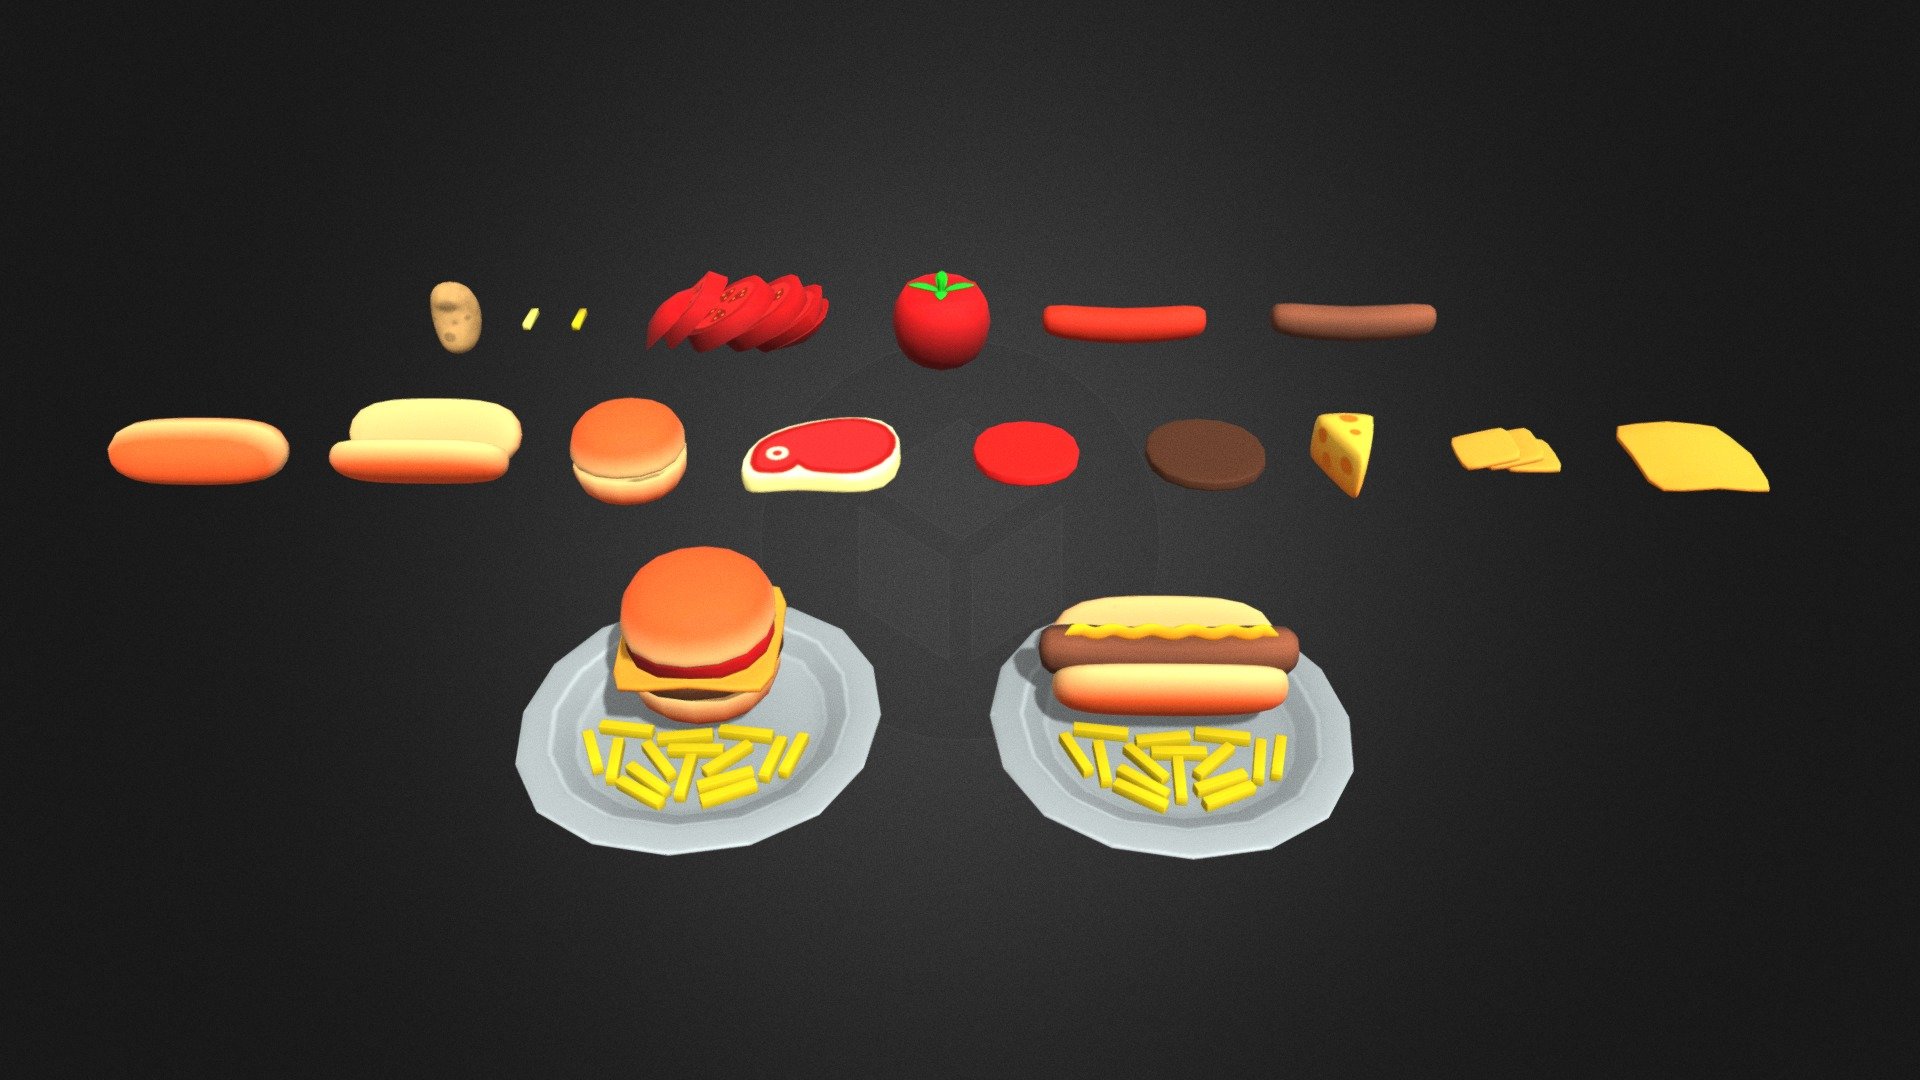 Hi, models and textures were created with Blender.

Package Included




Potatoes

Sliced Potato

Fried potatoes

Tomatoes

Sliced Tomatoes

Meat

Sliced Meat

Cooked meat

Cheese

Sliced Cheese

Baked Cheese

Hamburger bread

Sandwich Bread

Sliced Sandwich Bread

Sausage

Cooked Sausage

Hamburger and Hot Dog made with all these ingredients

Thanks :) - Cartoon Fast Food Pack - 3D model by İlhan Fehimovski (@ilhanfehimovski) 3d model